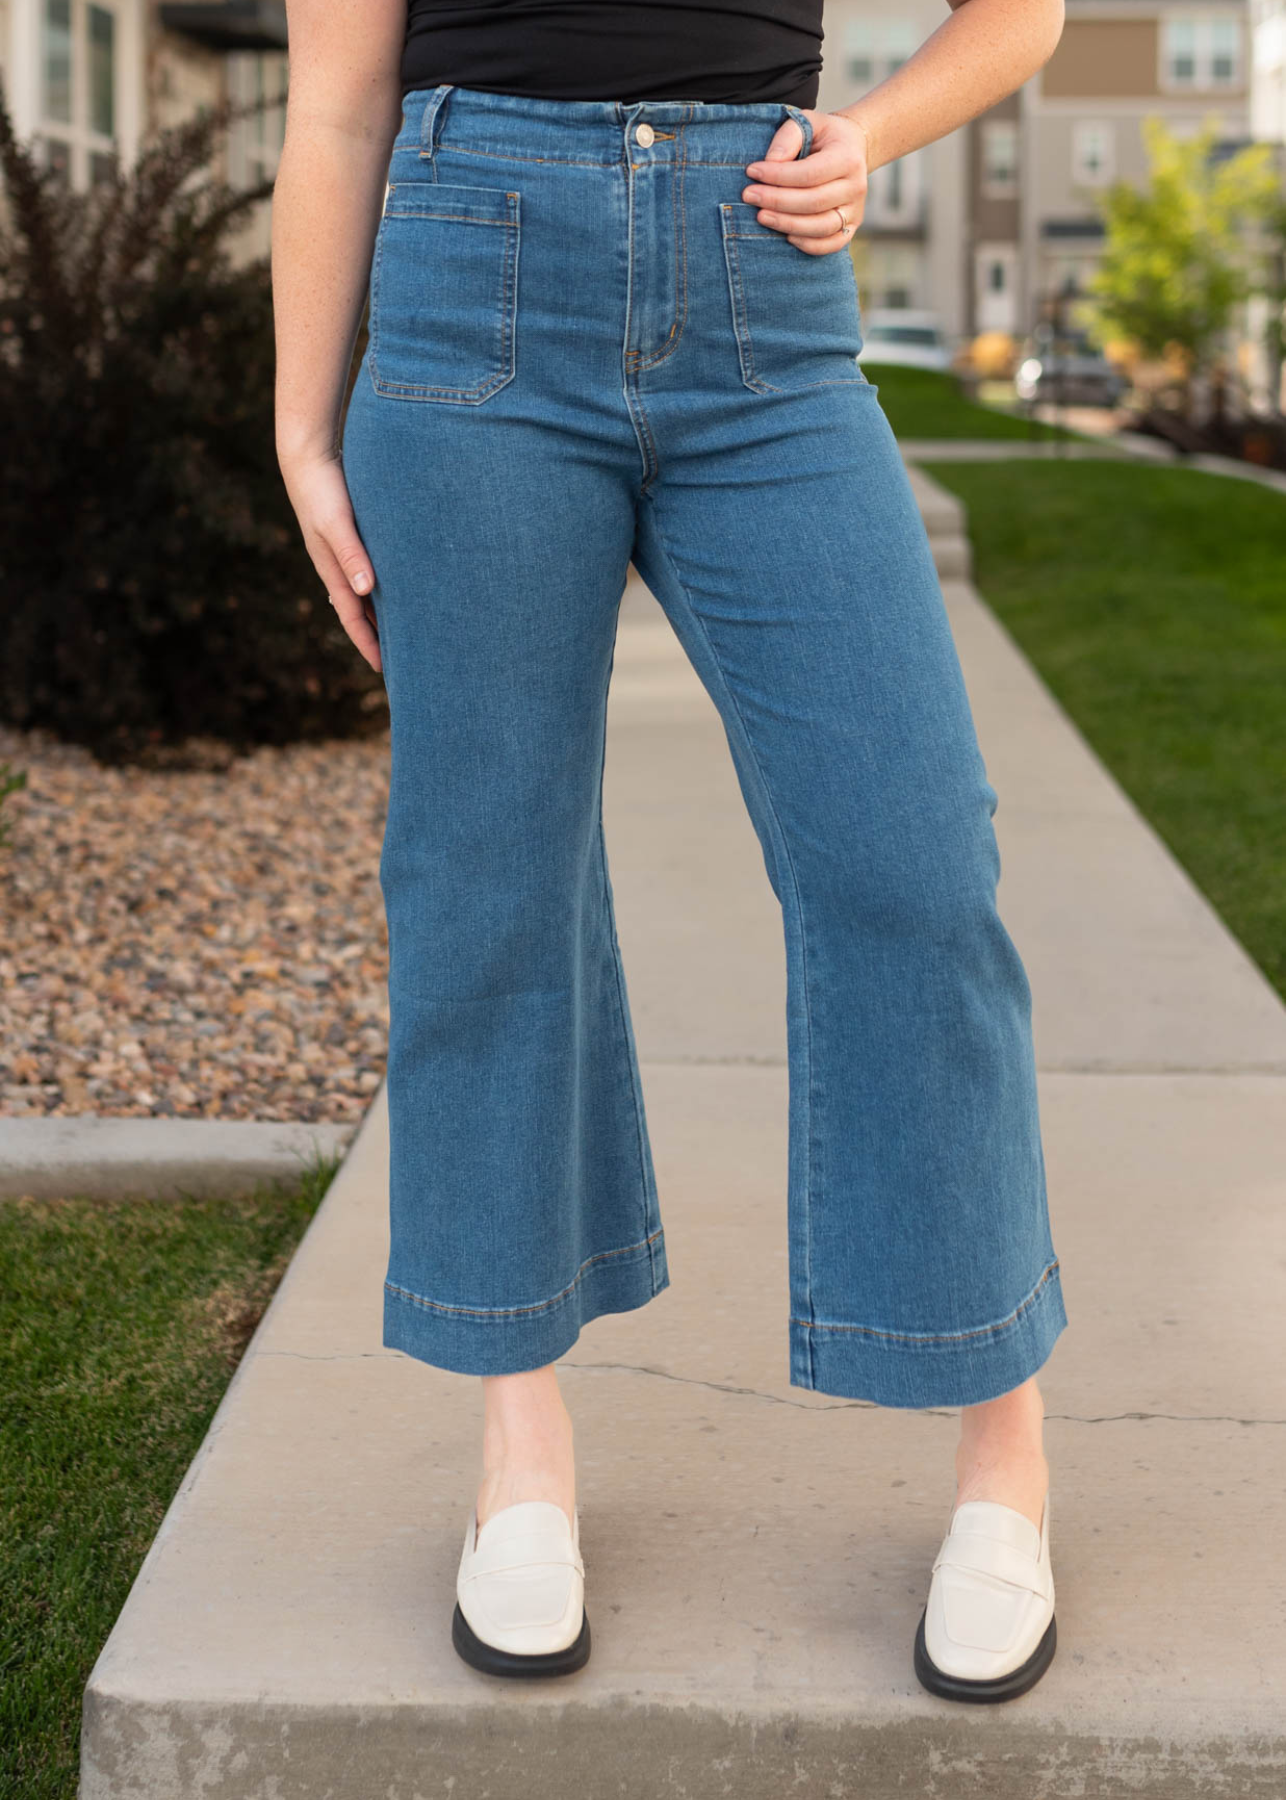 Crop denim jeans with front pockets